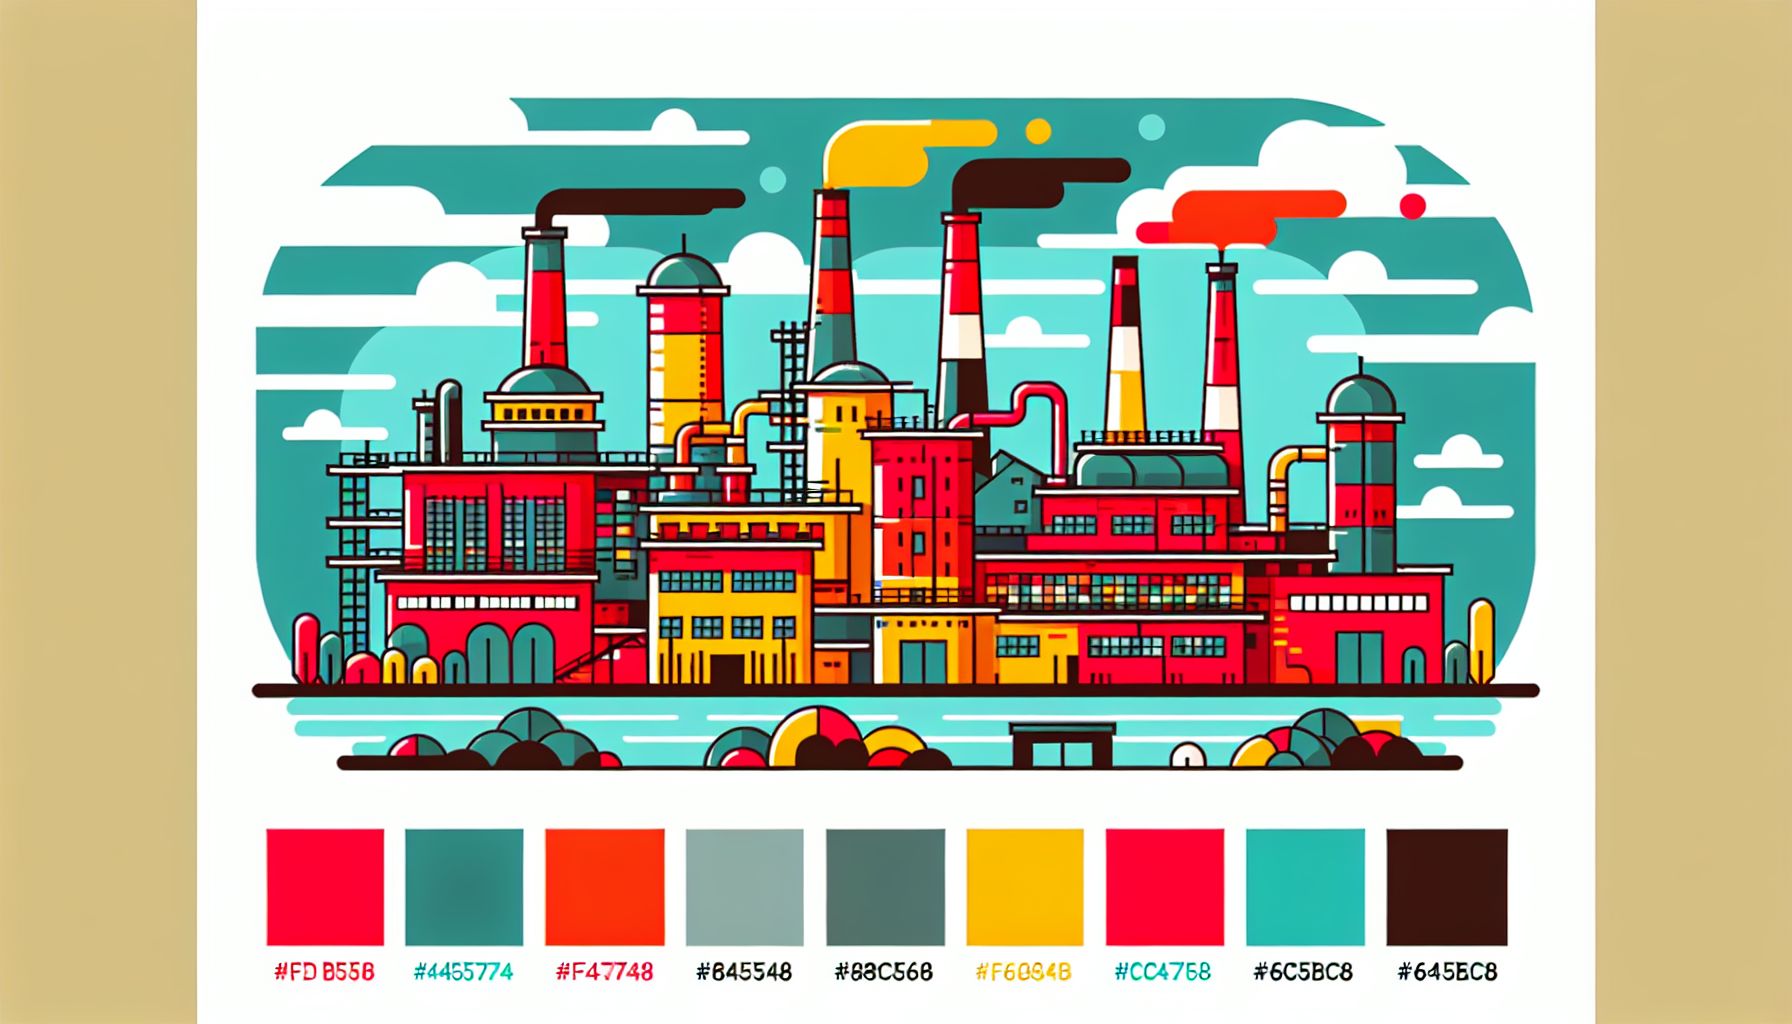 Factory in flat illustration style and white background, red #f47574, green #88c7a8, yellow #fcc44b, and blue #645bc8 colors.